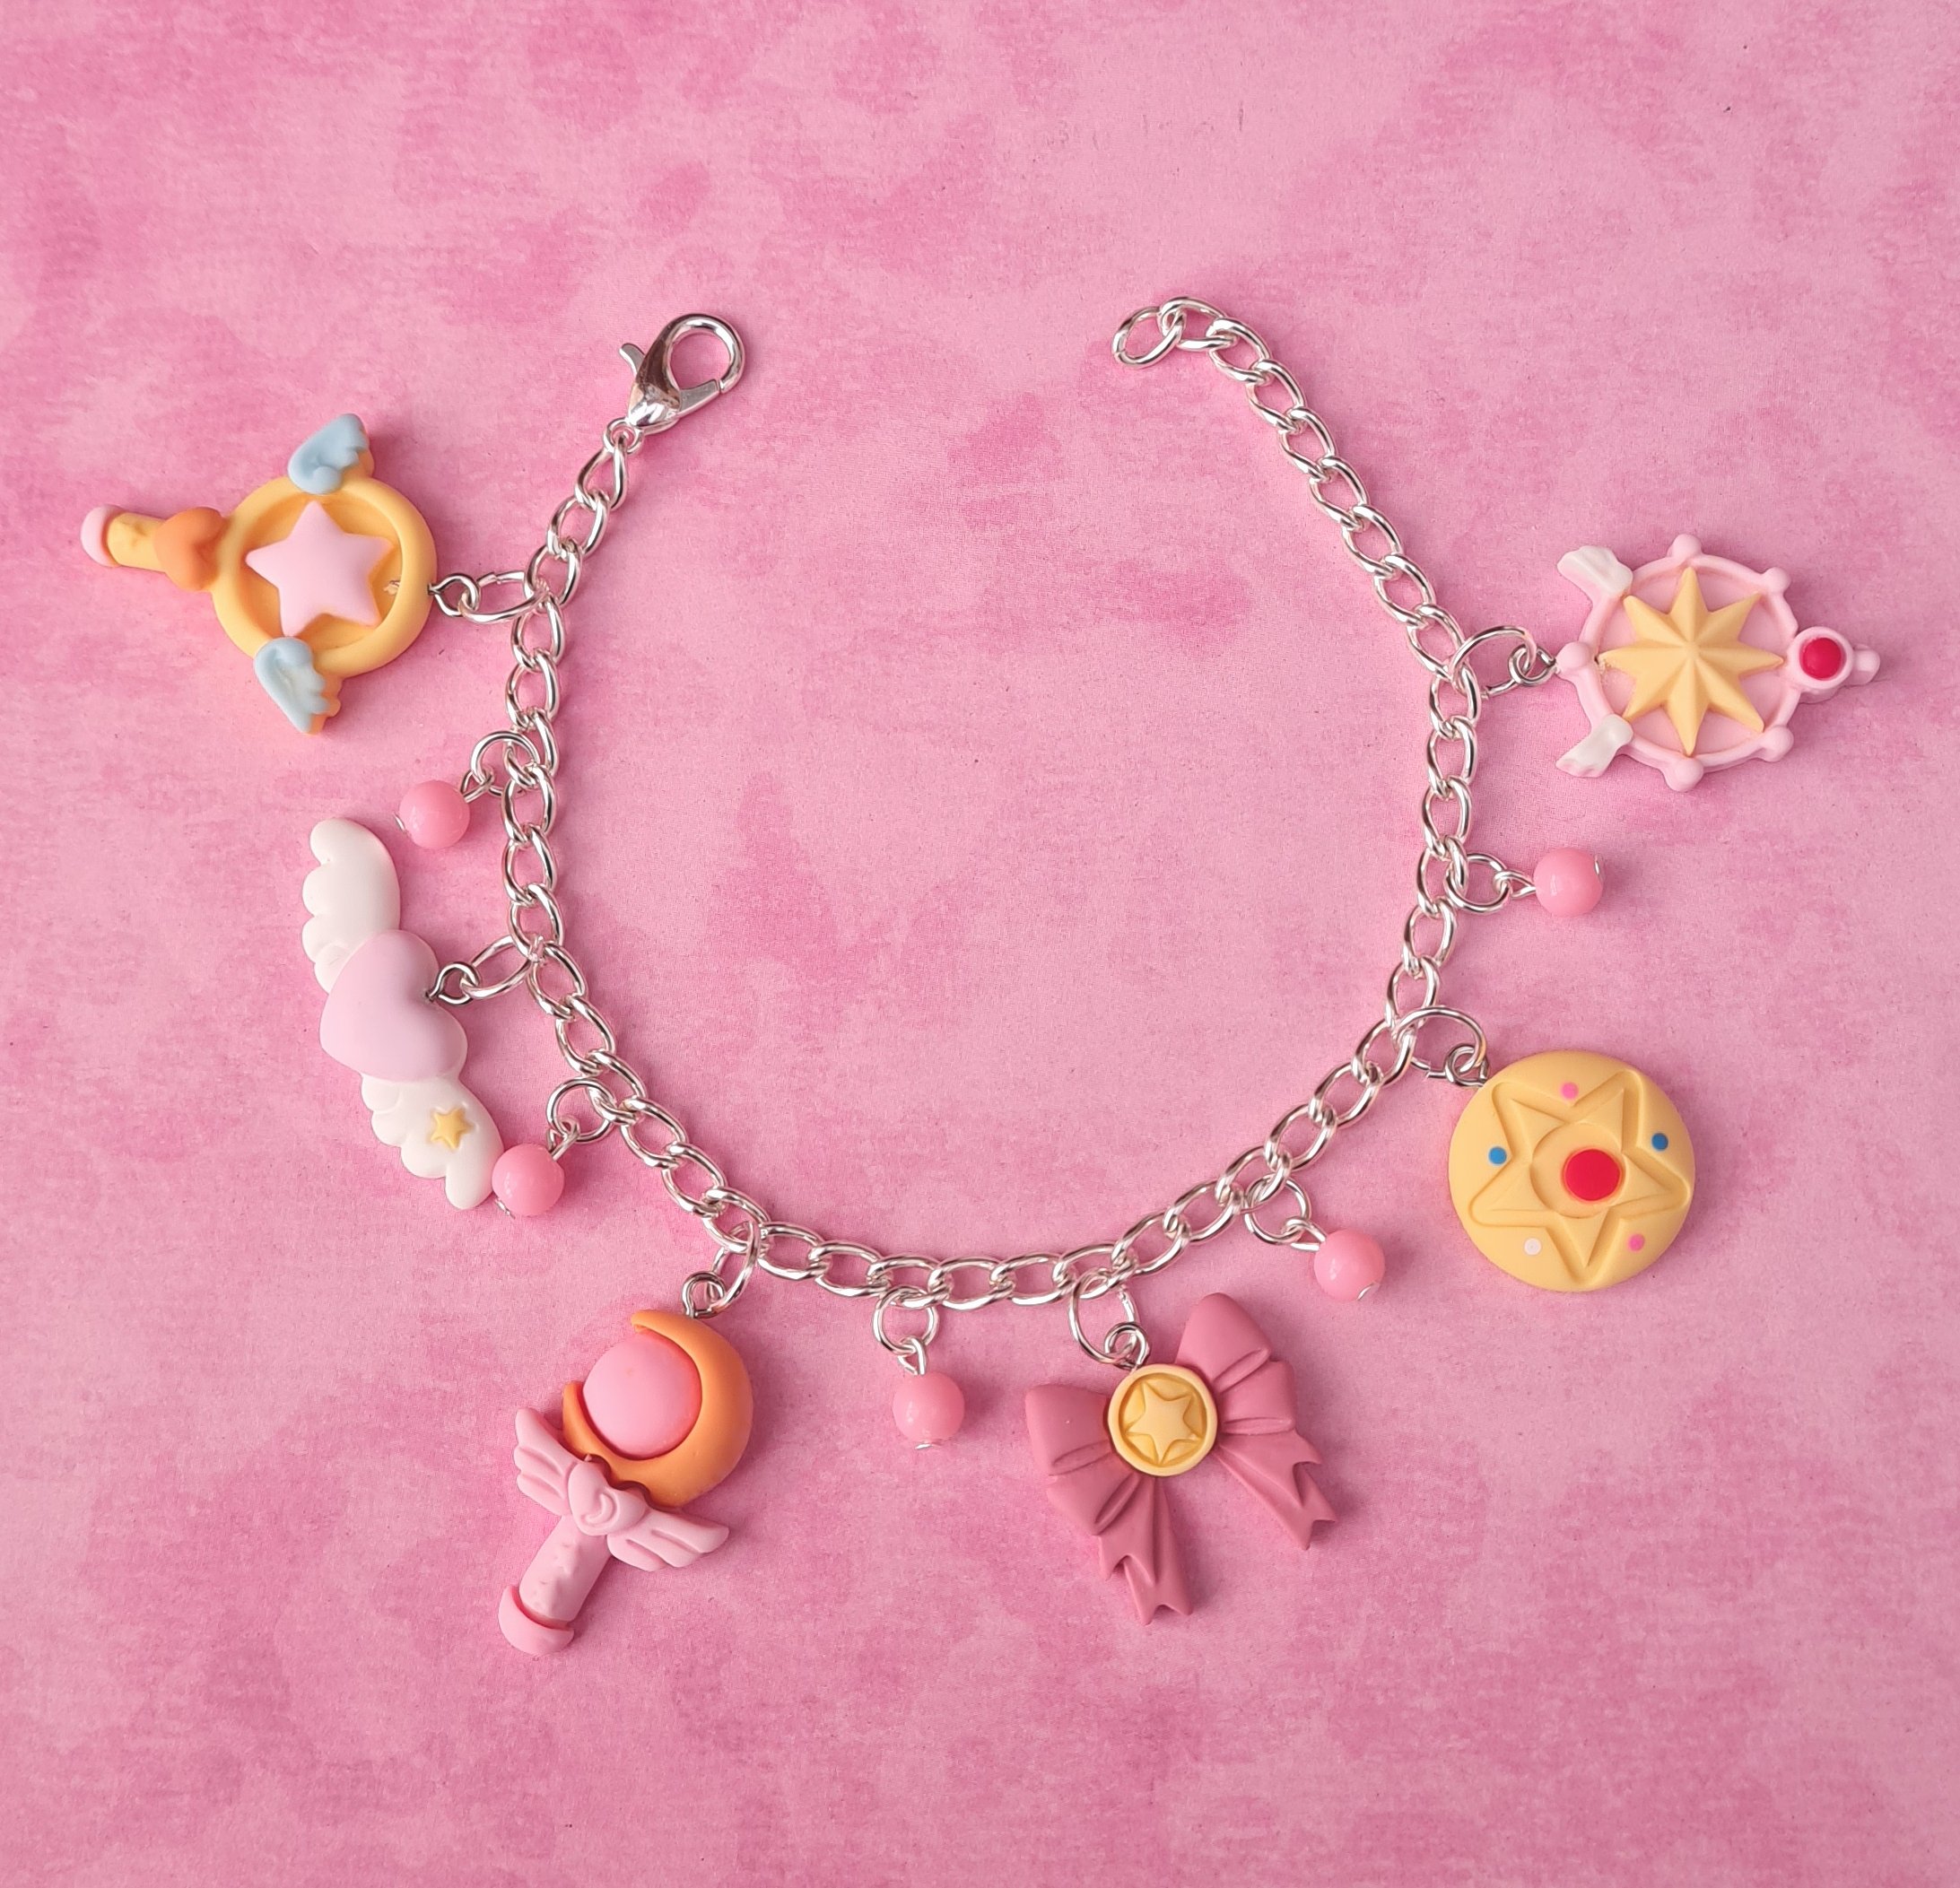 Kawaii Japanese Anime Sanrio Charm Bracelet With Hello Kitty Kuromi Melody  Cinnamoroll Pom Pom Purin Diy Accessories For Women - Animation  Derivatives/peripheral Products - AliExpress